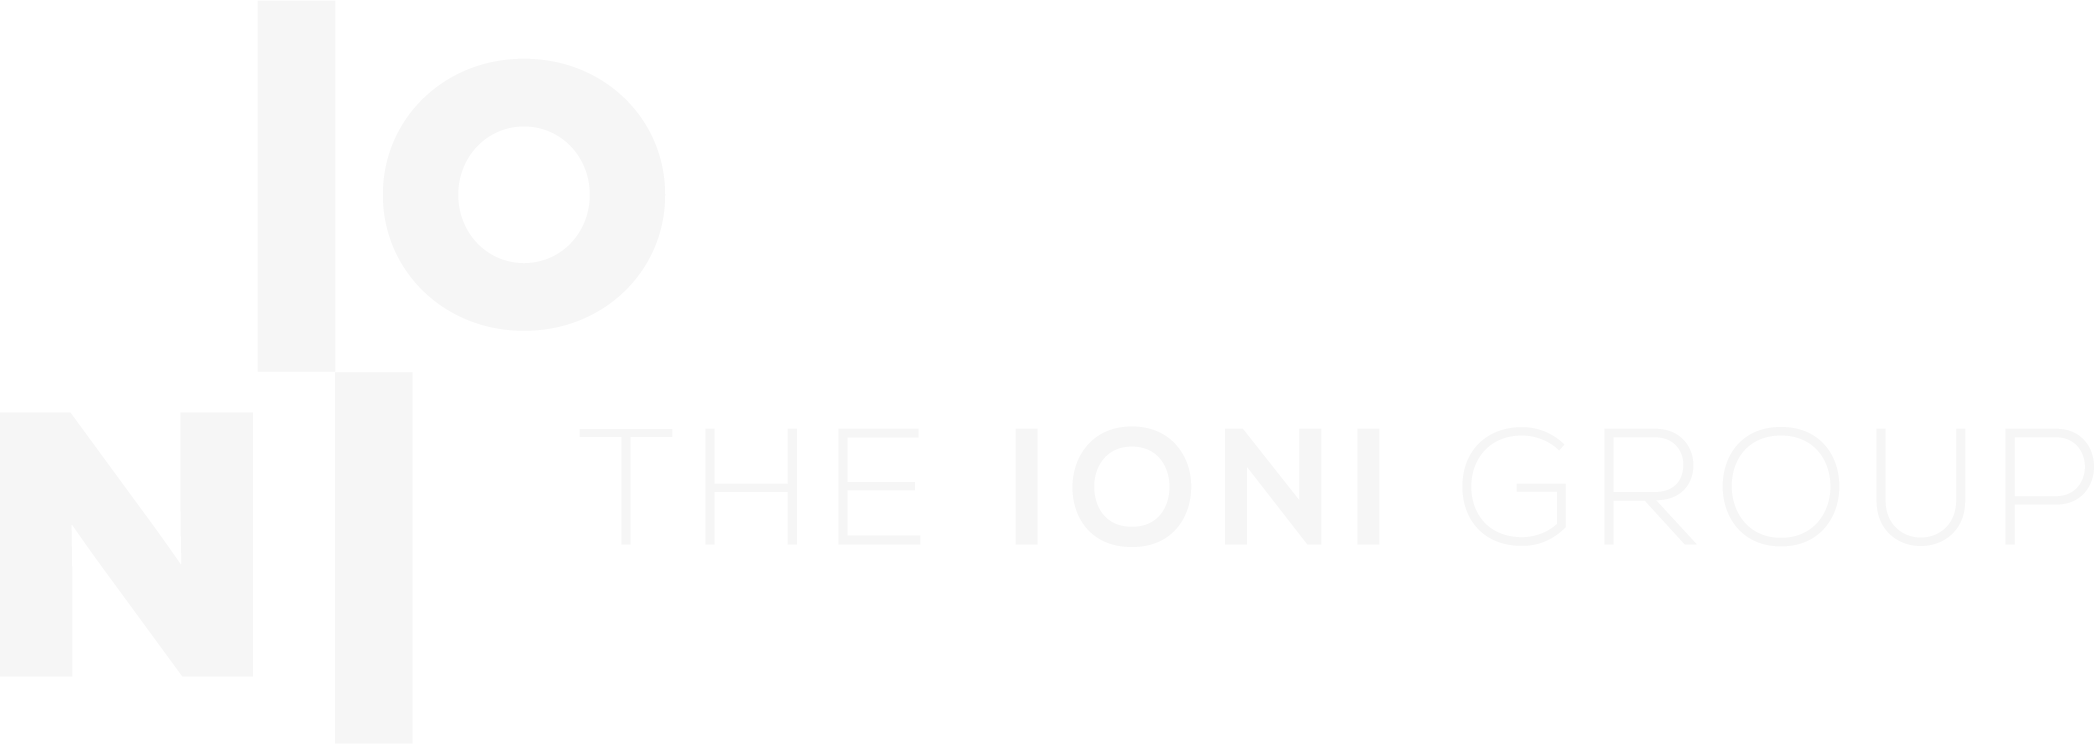 THE IONI GROUP